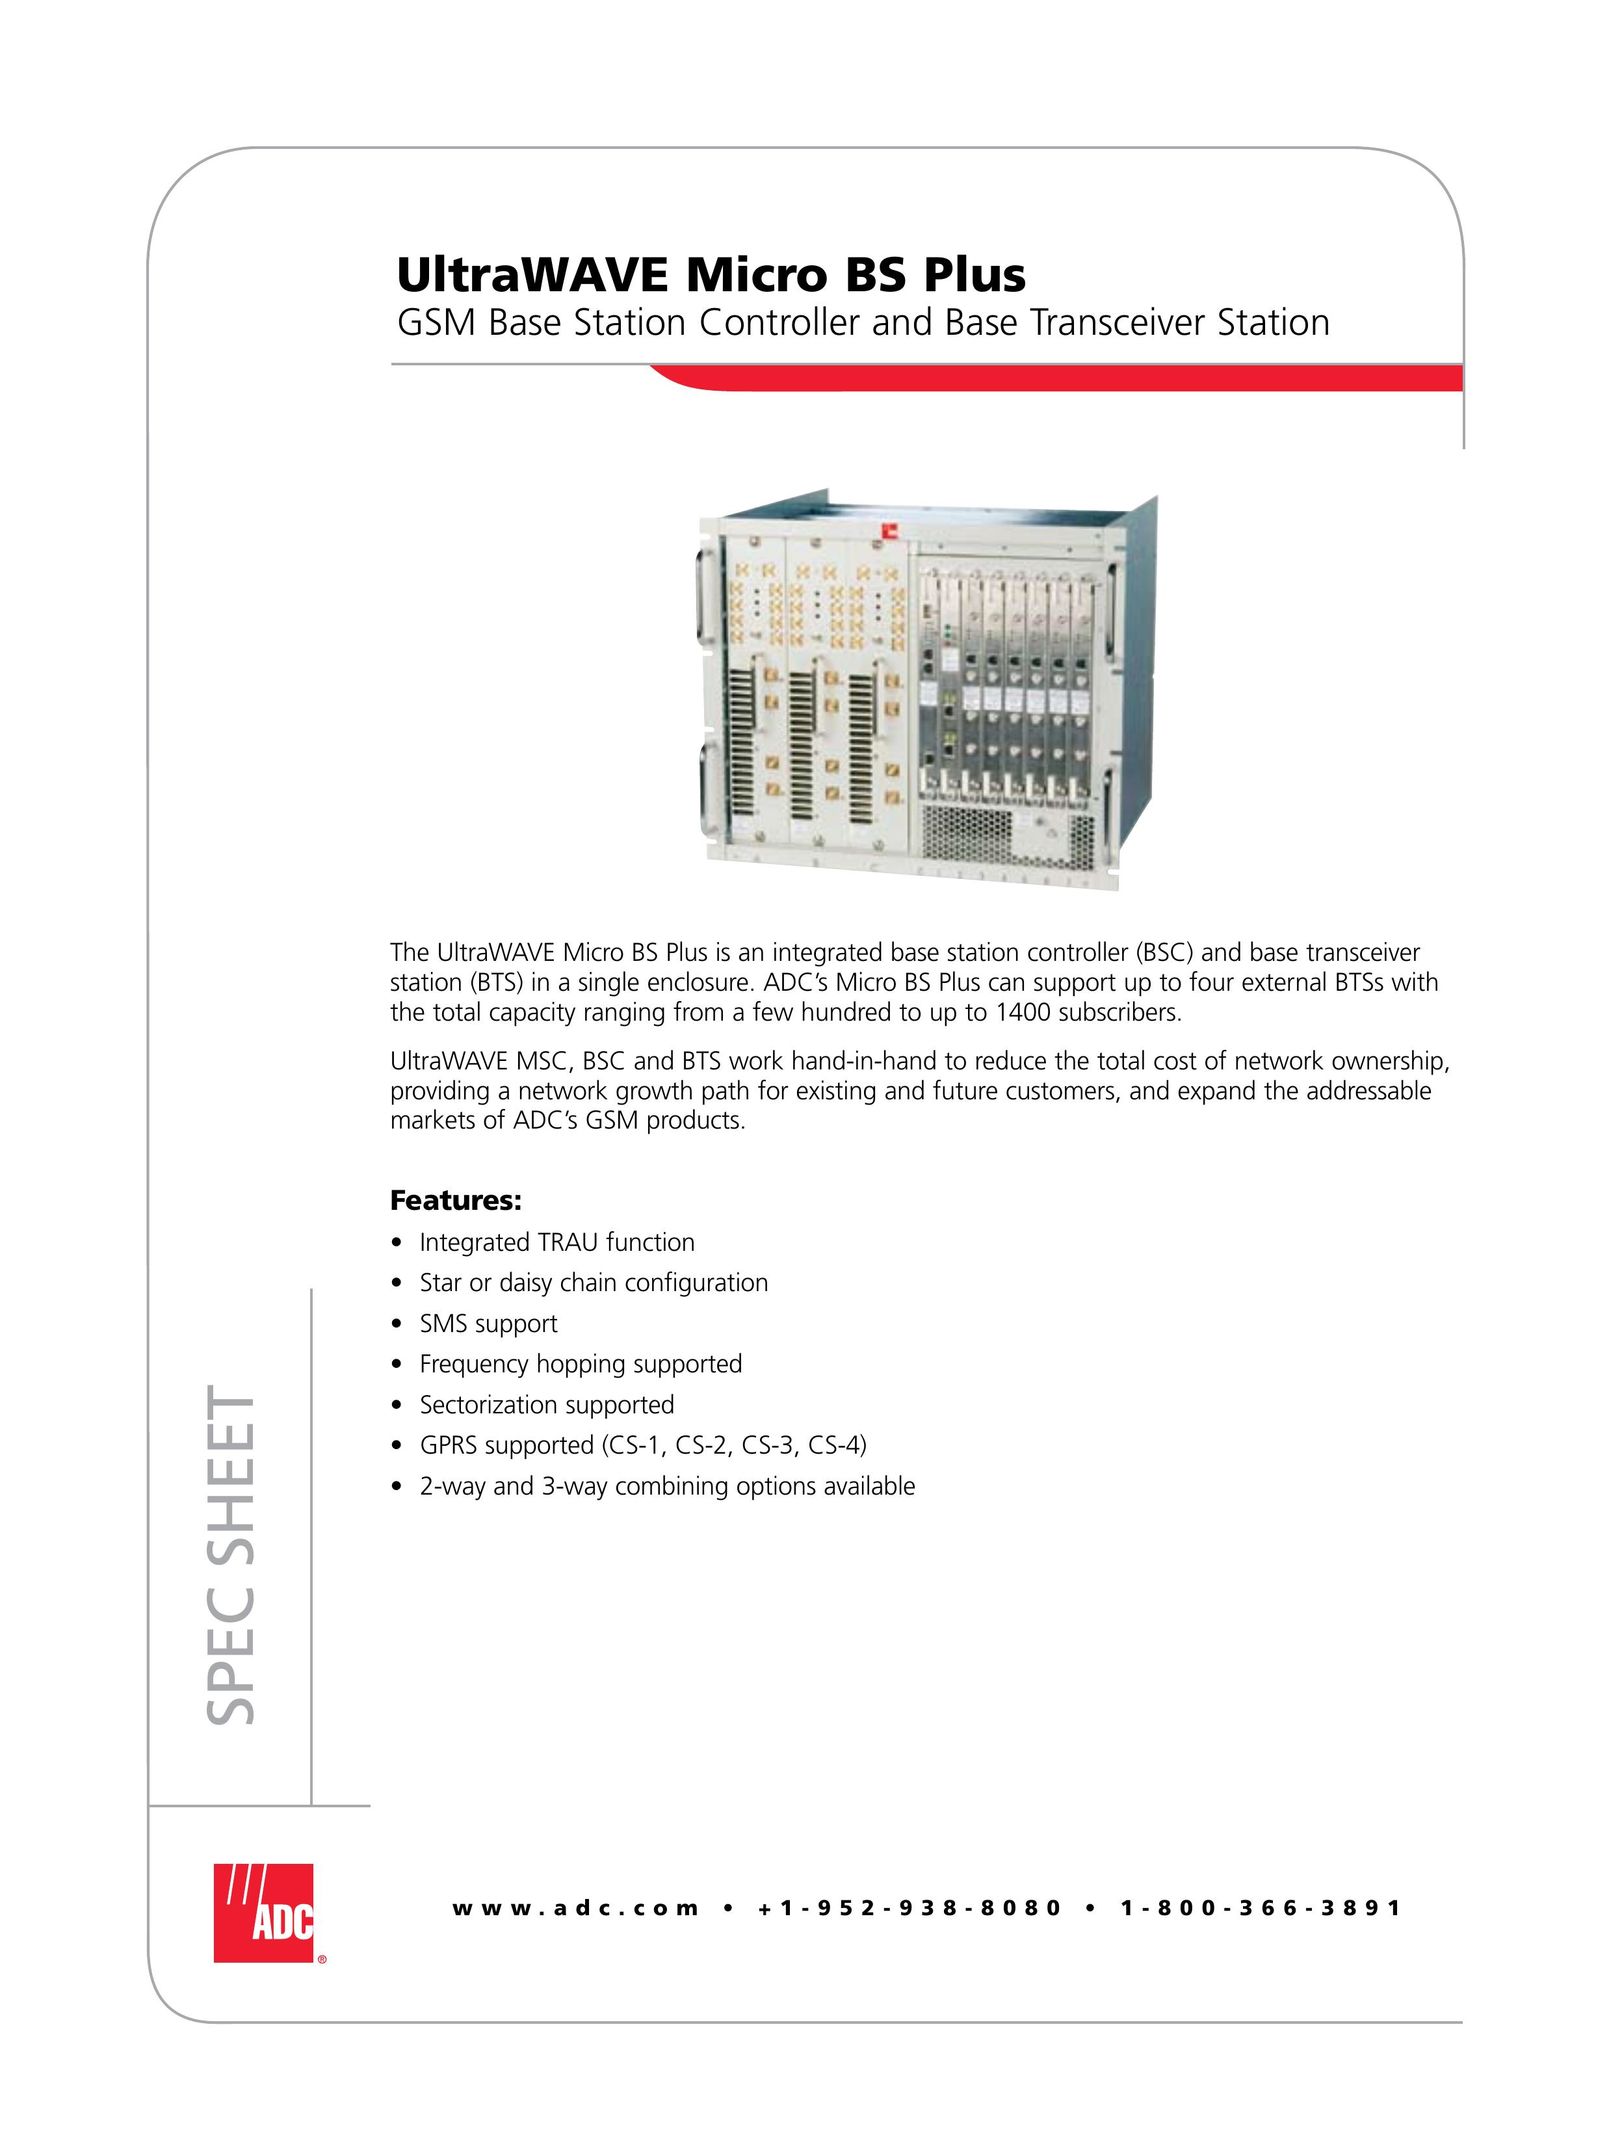 ADC UltraWAVE Switch User Manual